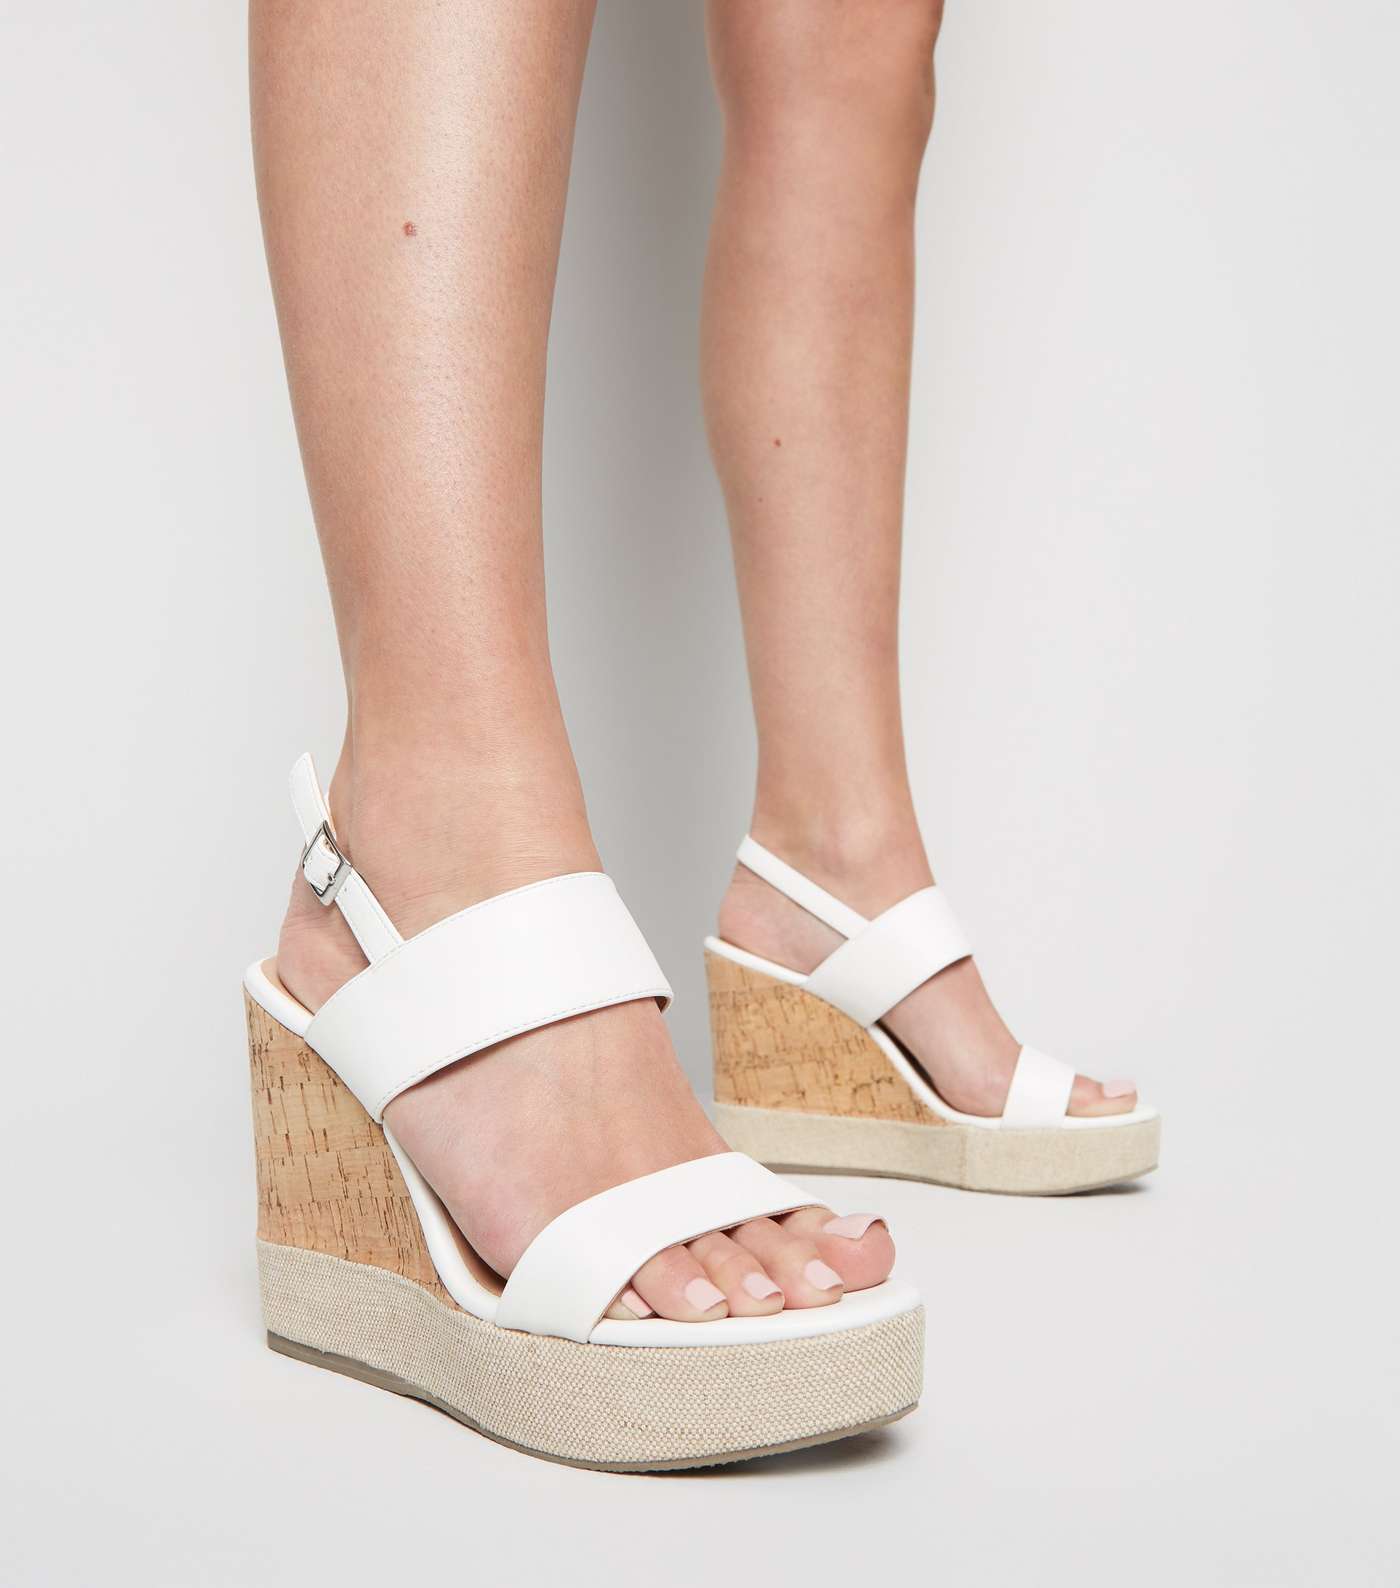 White Leather-Look Canvas Trim Cork Wedges Image 2